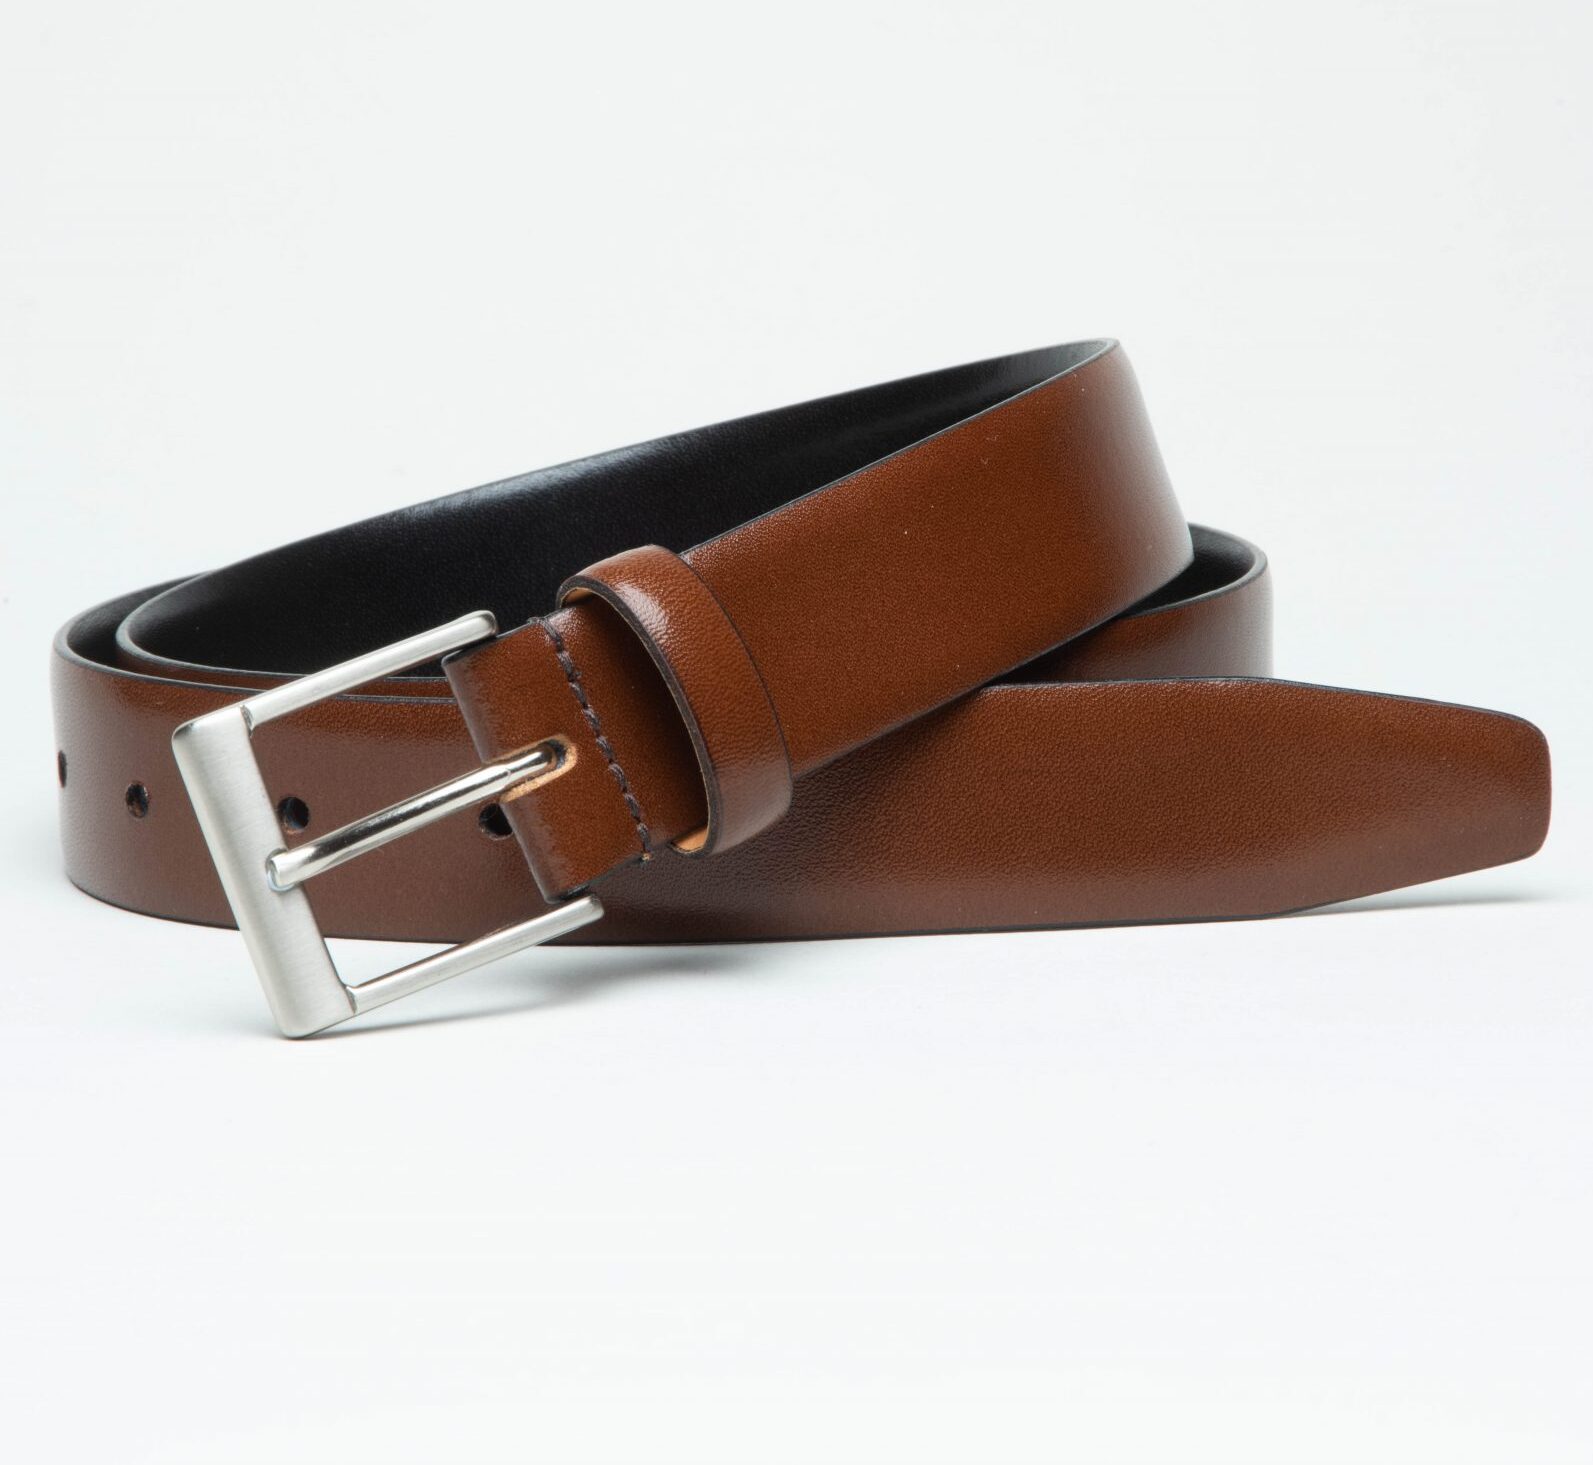 LEATHER DRESS BELT - TAN - Cain of Heswall